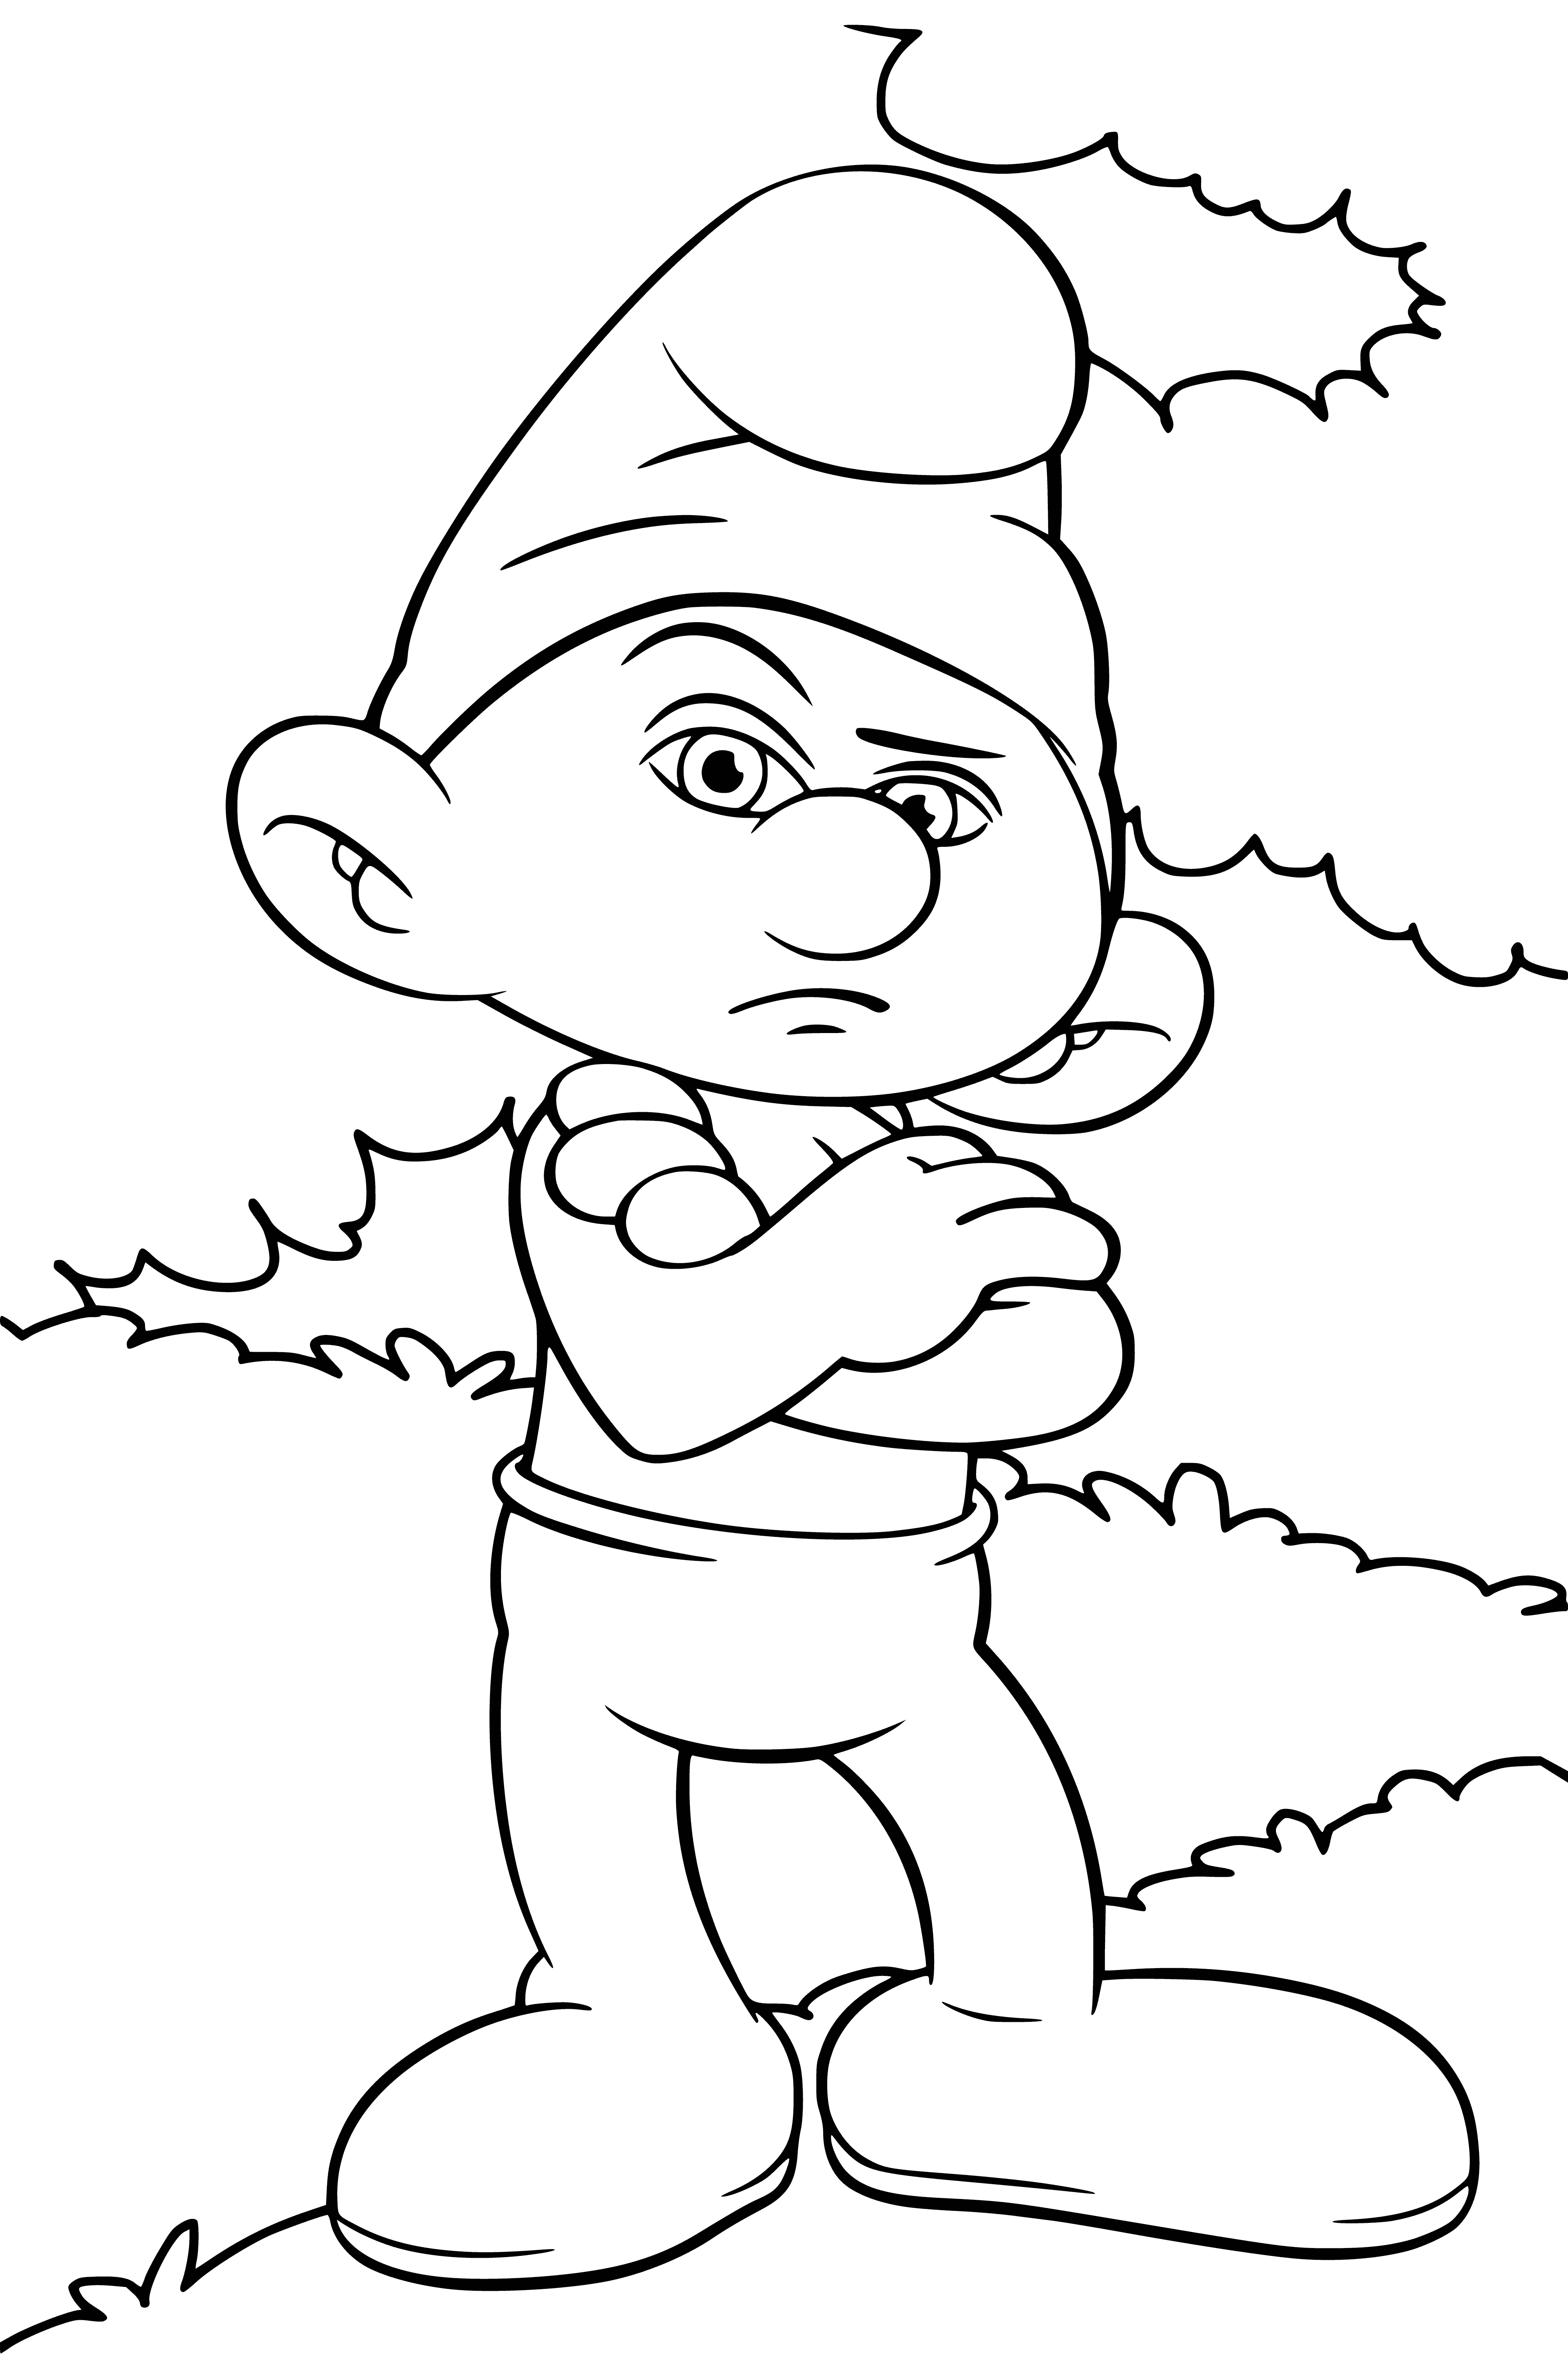 coloring page: Once led by Papa Smurf, the Smurfs are small, blue-skinned creatures helping each other to be happy in their mushroom homes in the forest. #Smurfs